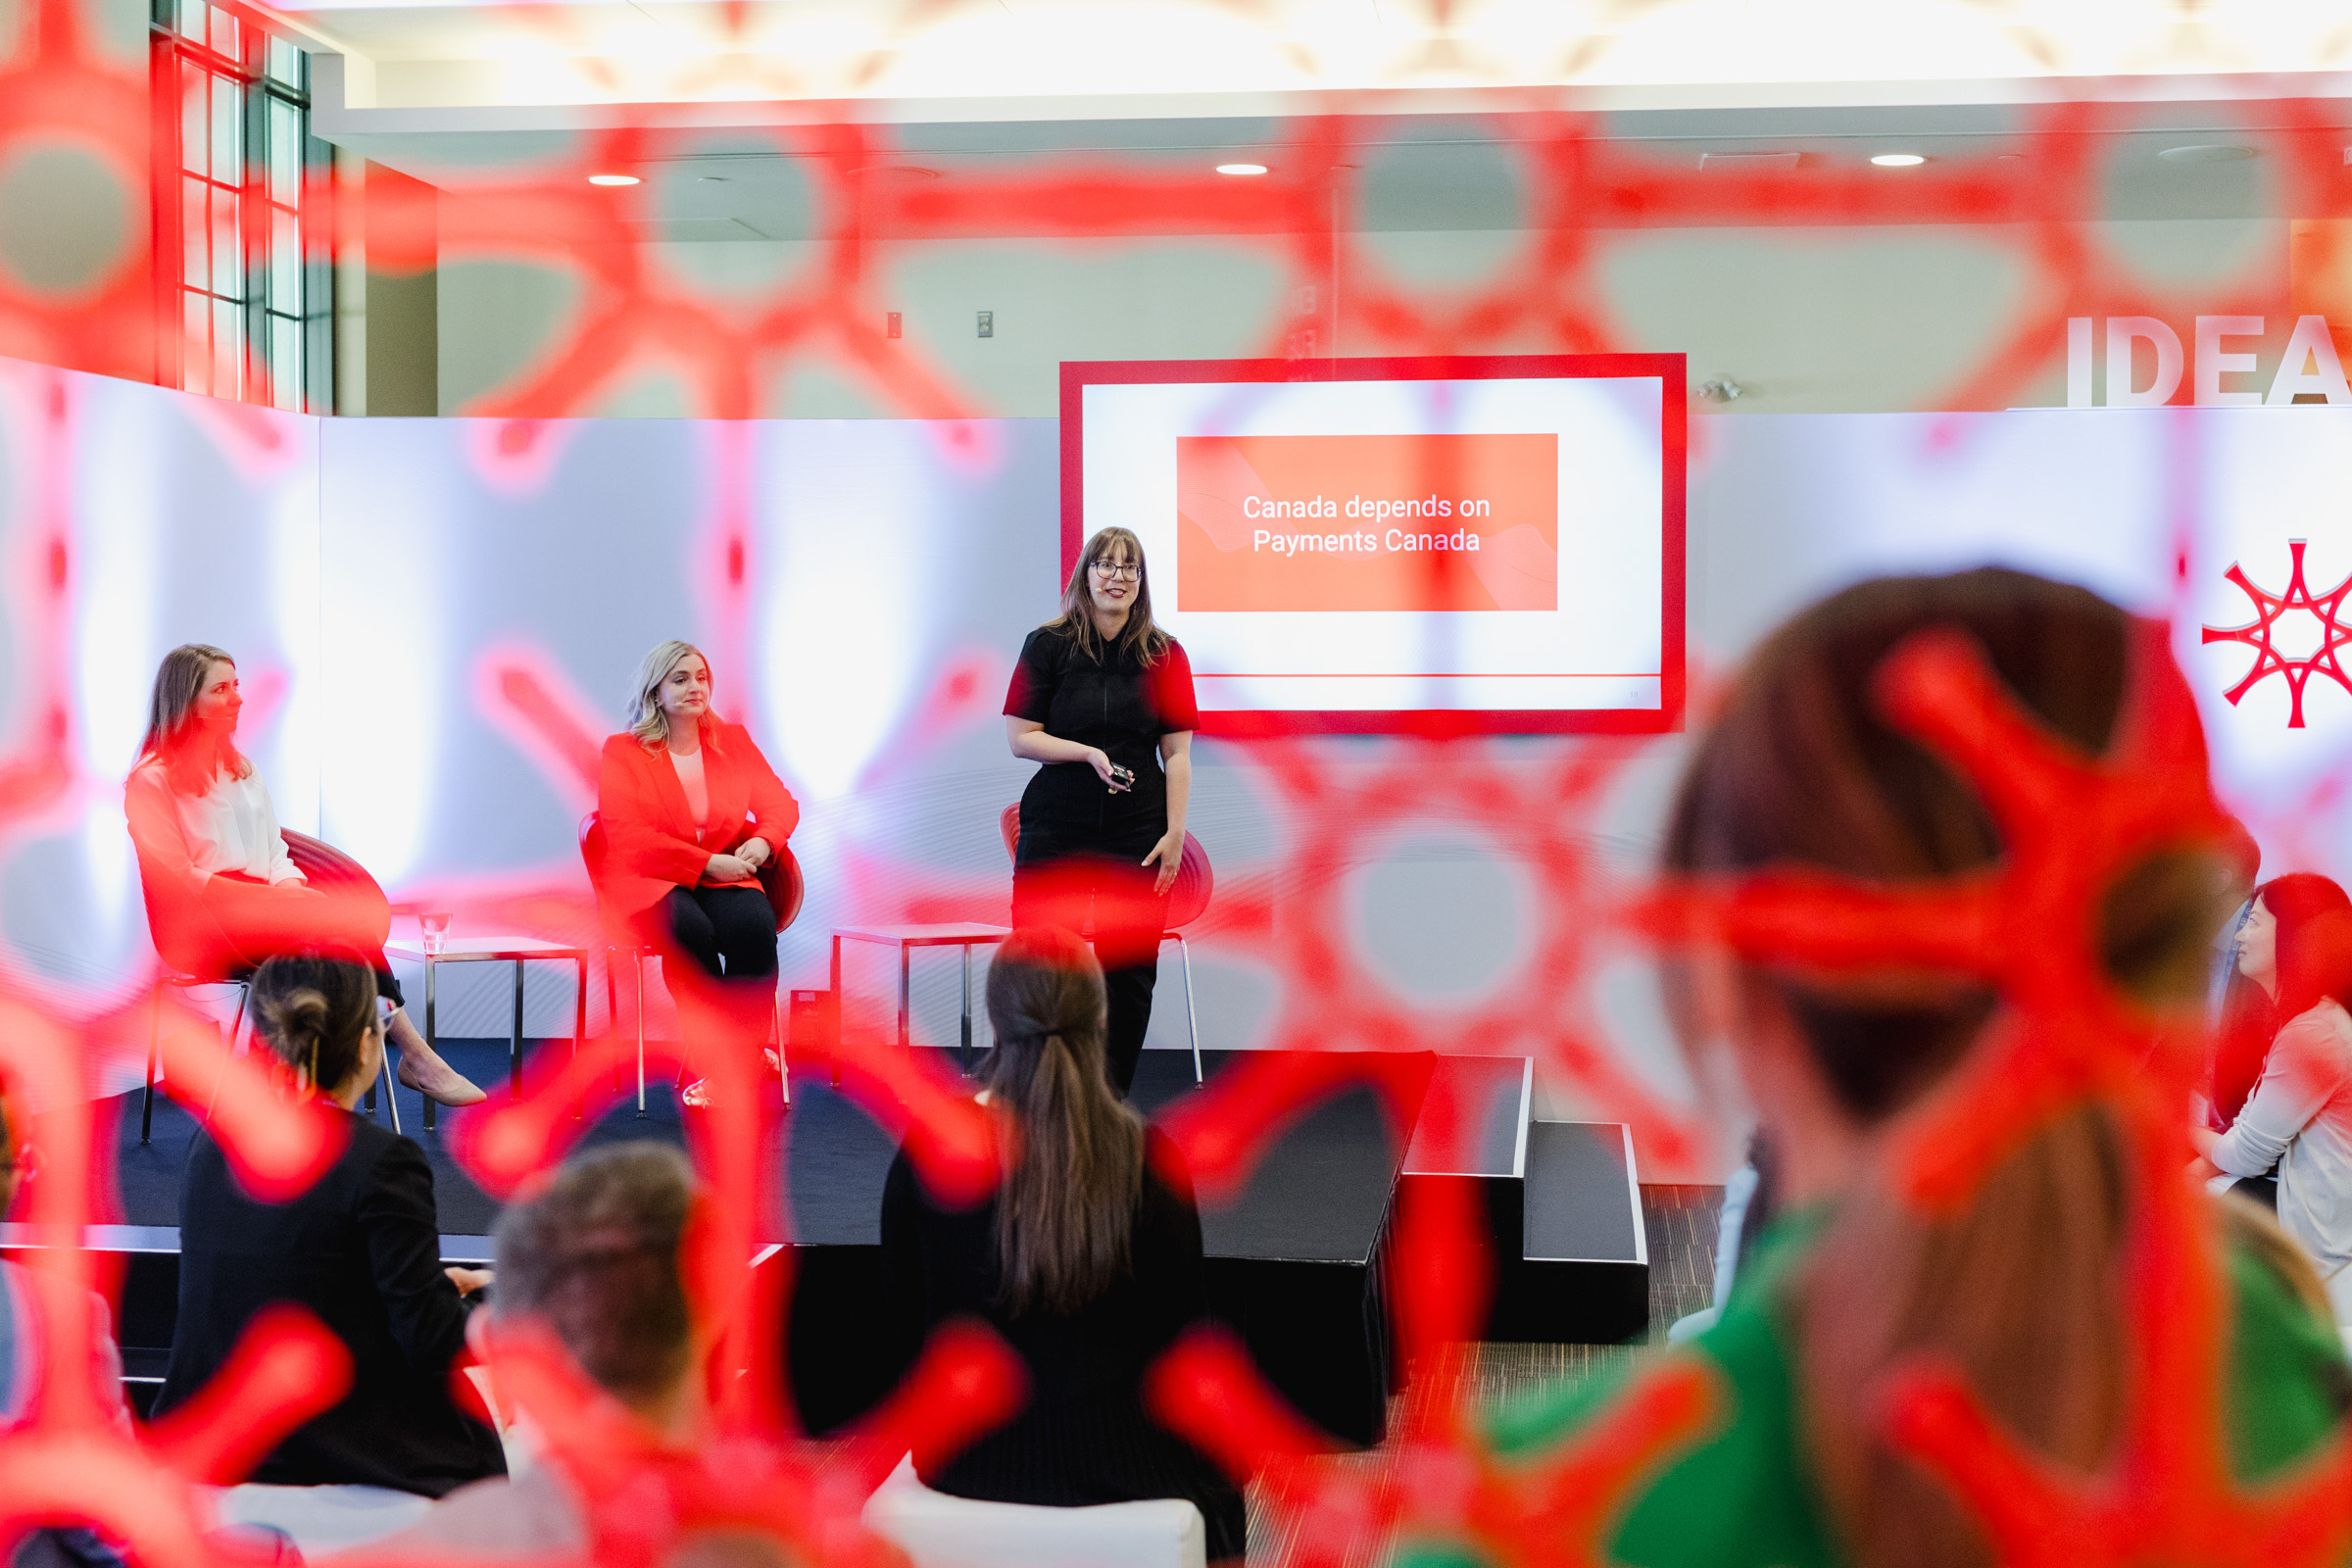 A panel of four people is speaking on a stage at a Payments Canada event, captured with skilled event photography. A screen behind them displays the text, "Canada depends on Payments Canada." The foreground is partially obscured by red netting.